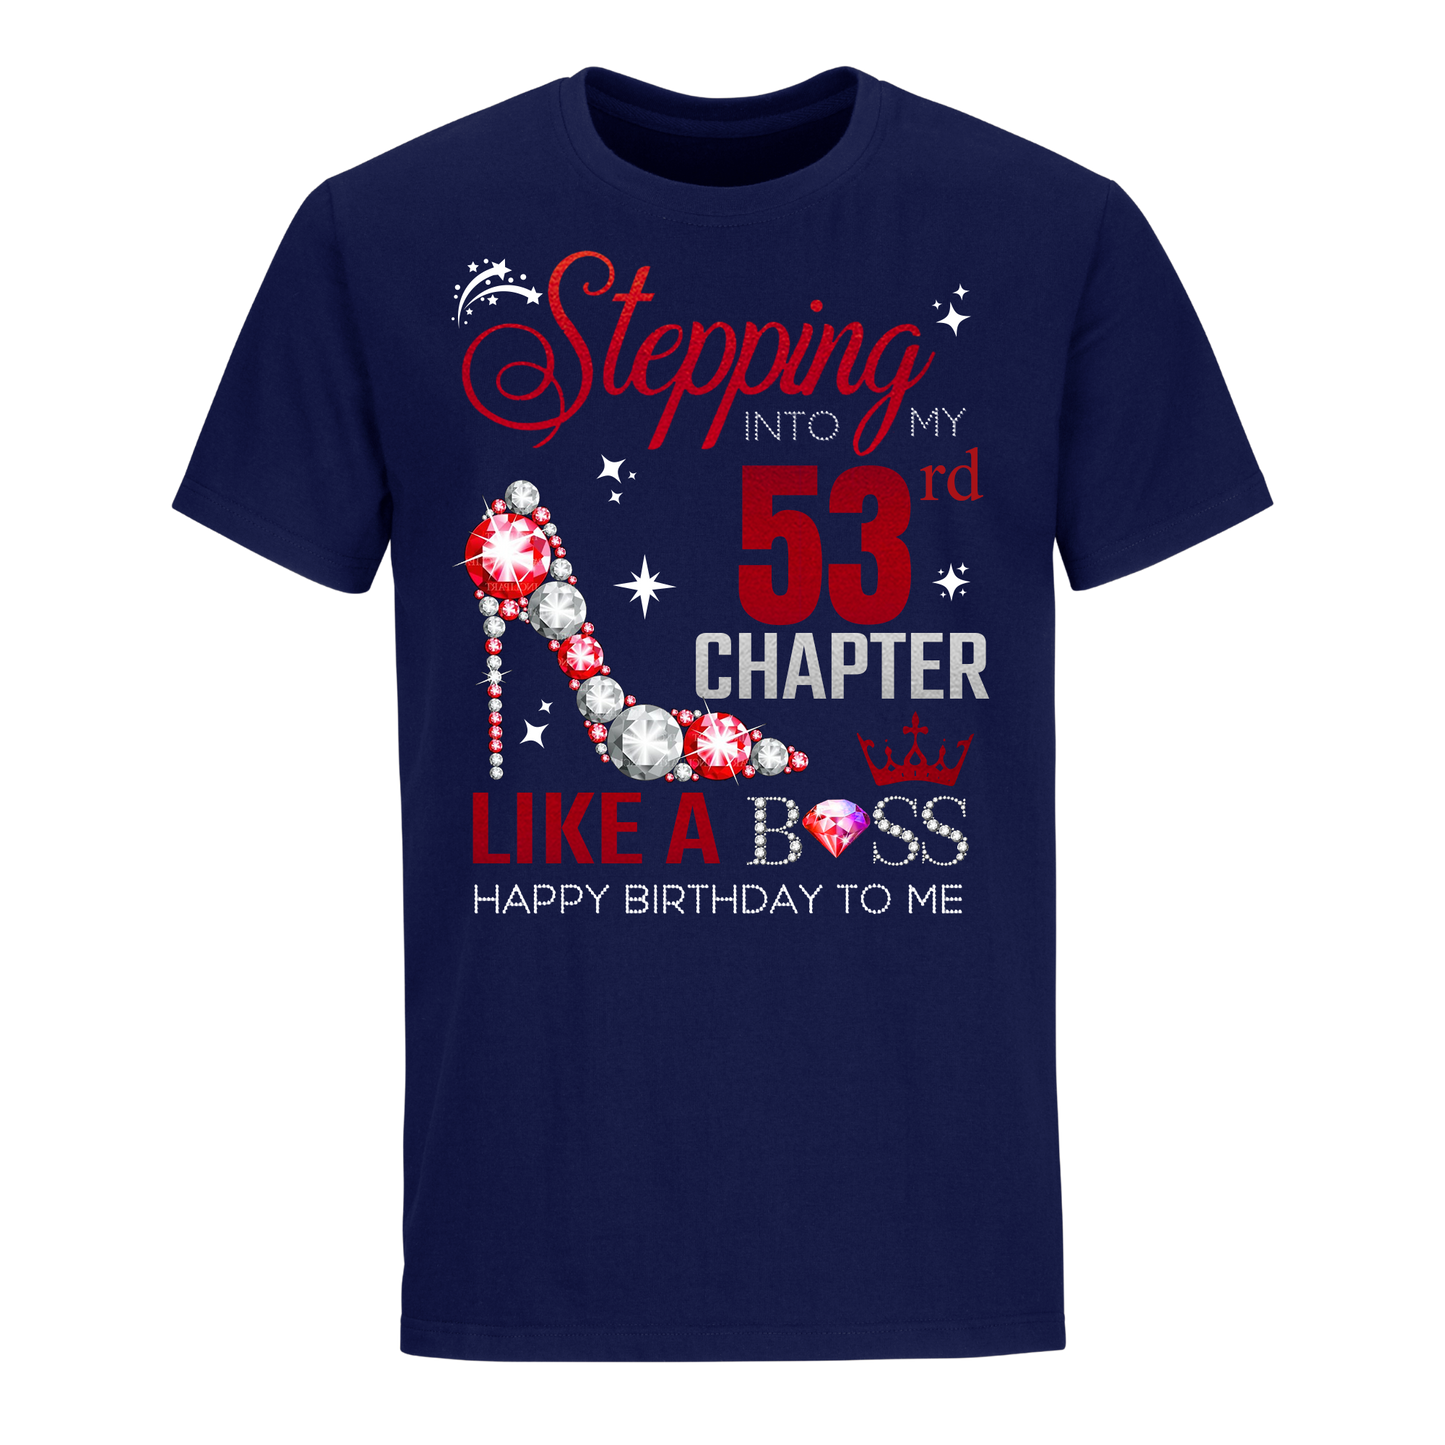 STEPPING INTO MY 53RD UNISEX SHIRT